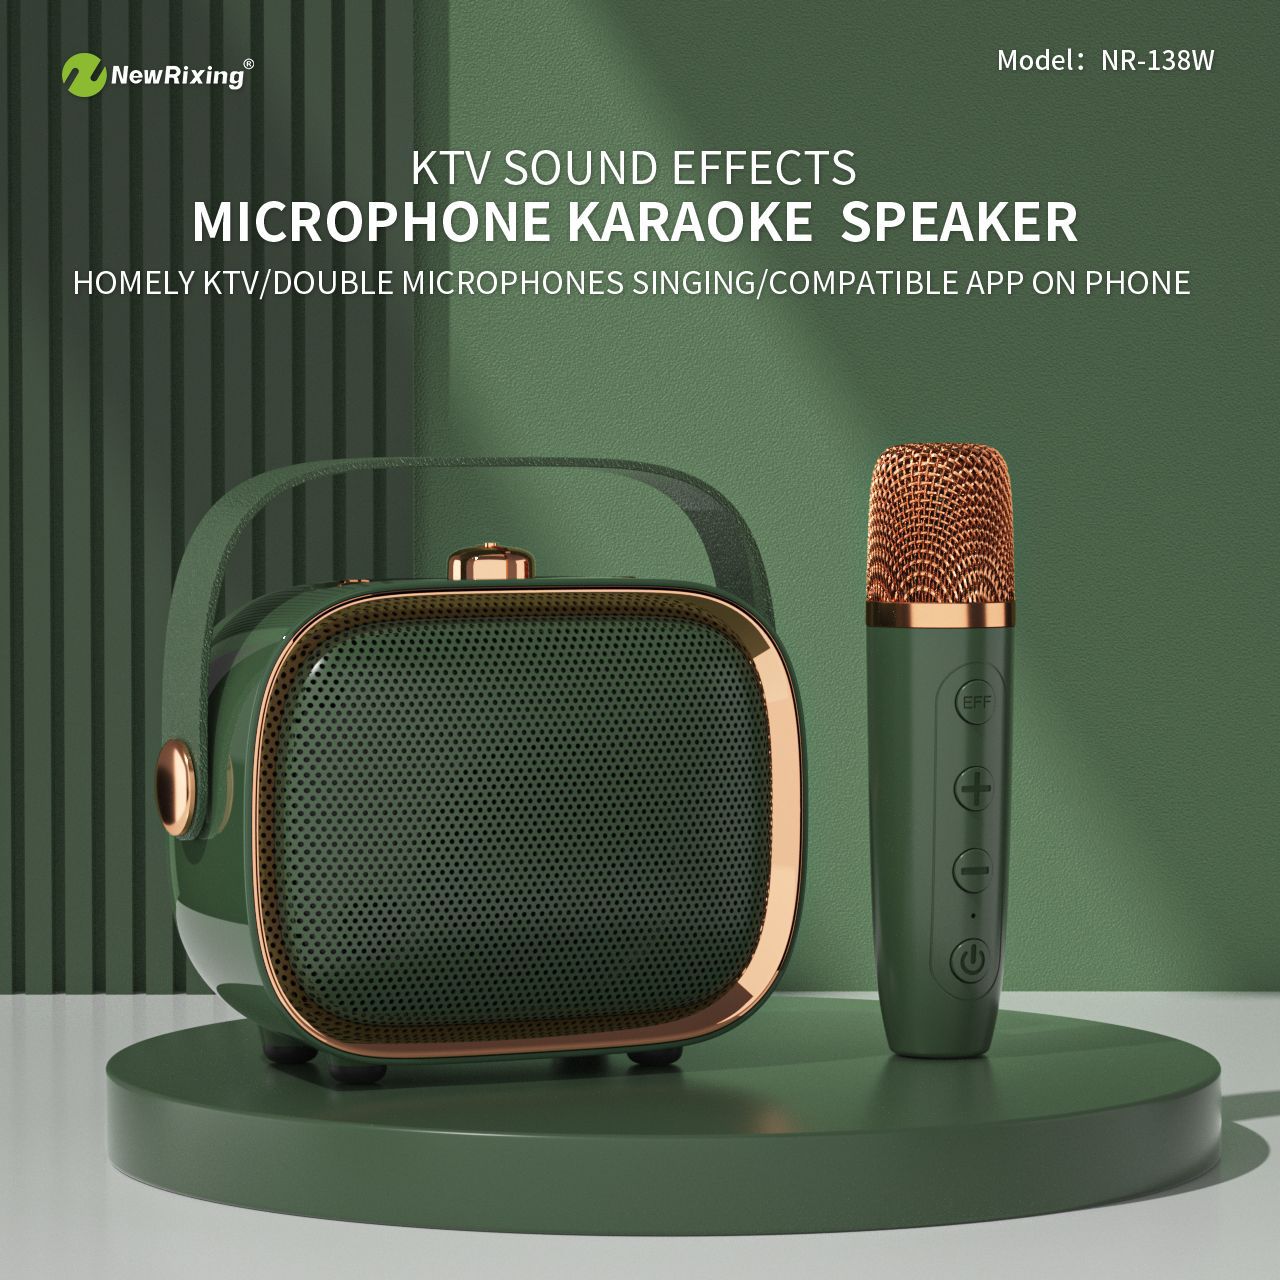 NR-138W Family KTV Stereo Suit Home Karaoke Microphone Professional Karaoke Singing and Singing All-in-One Machine Microphone